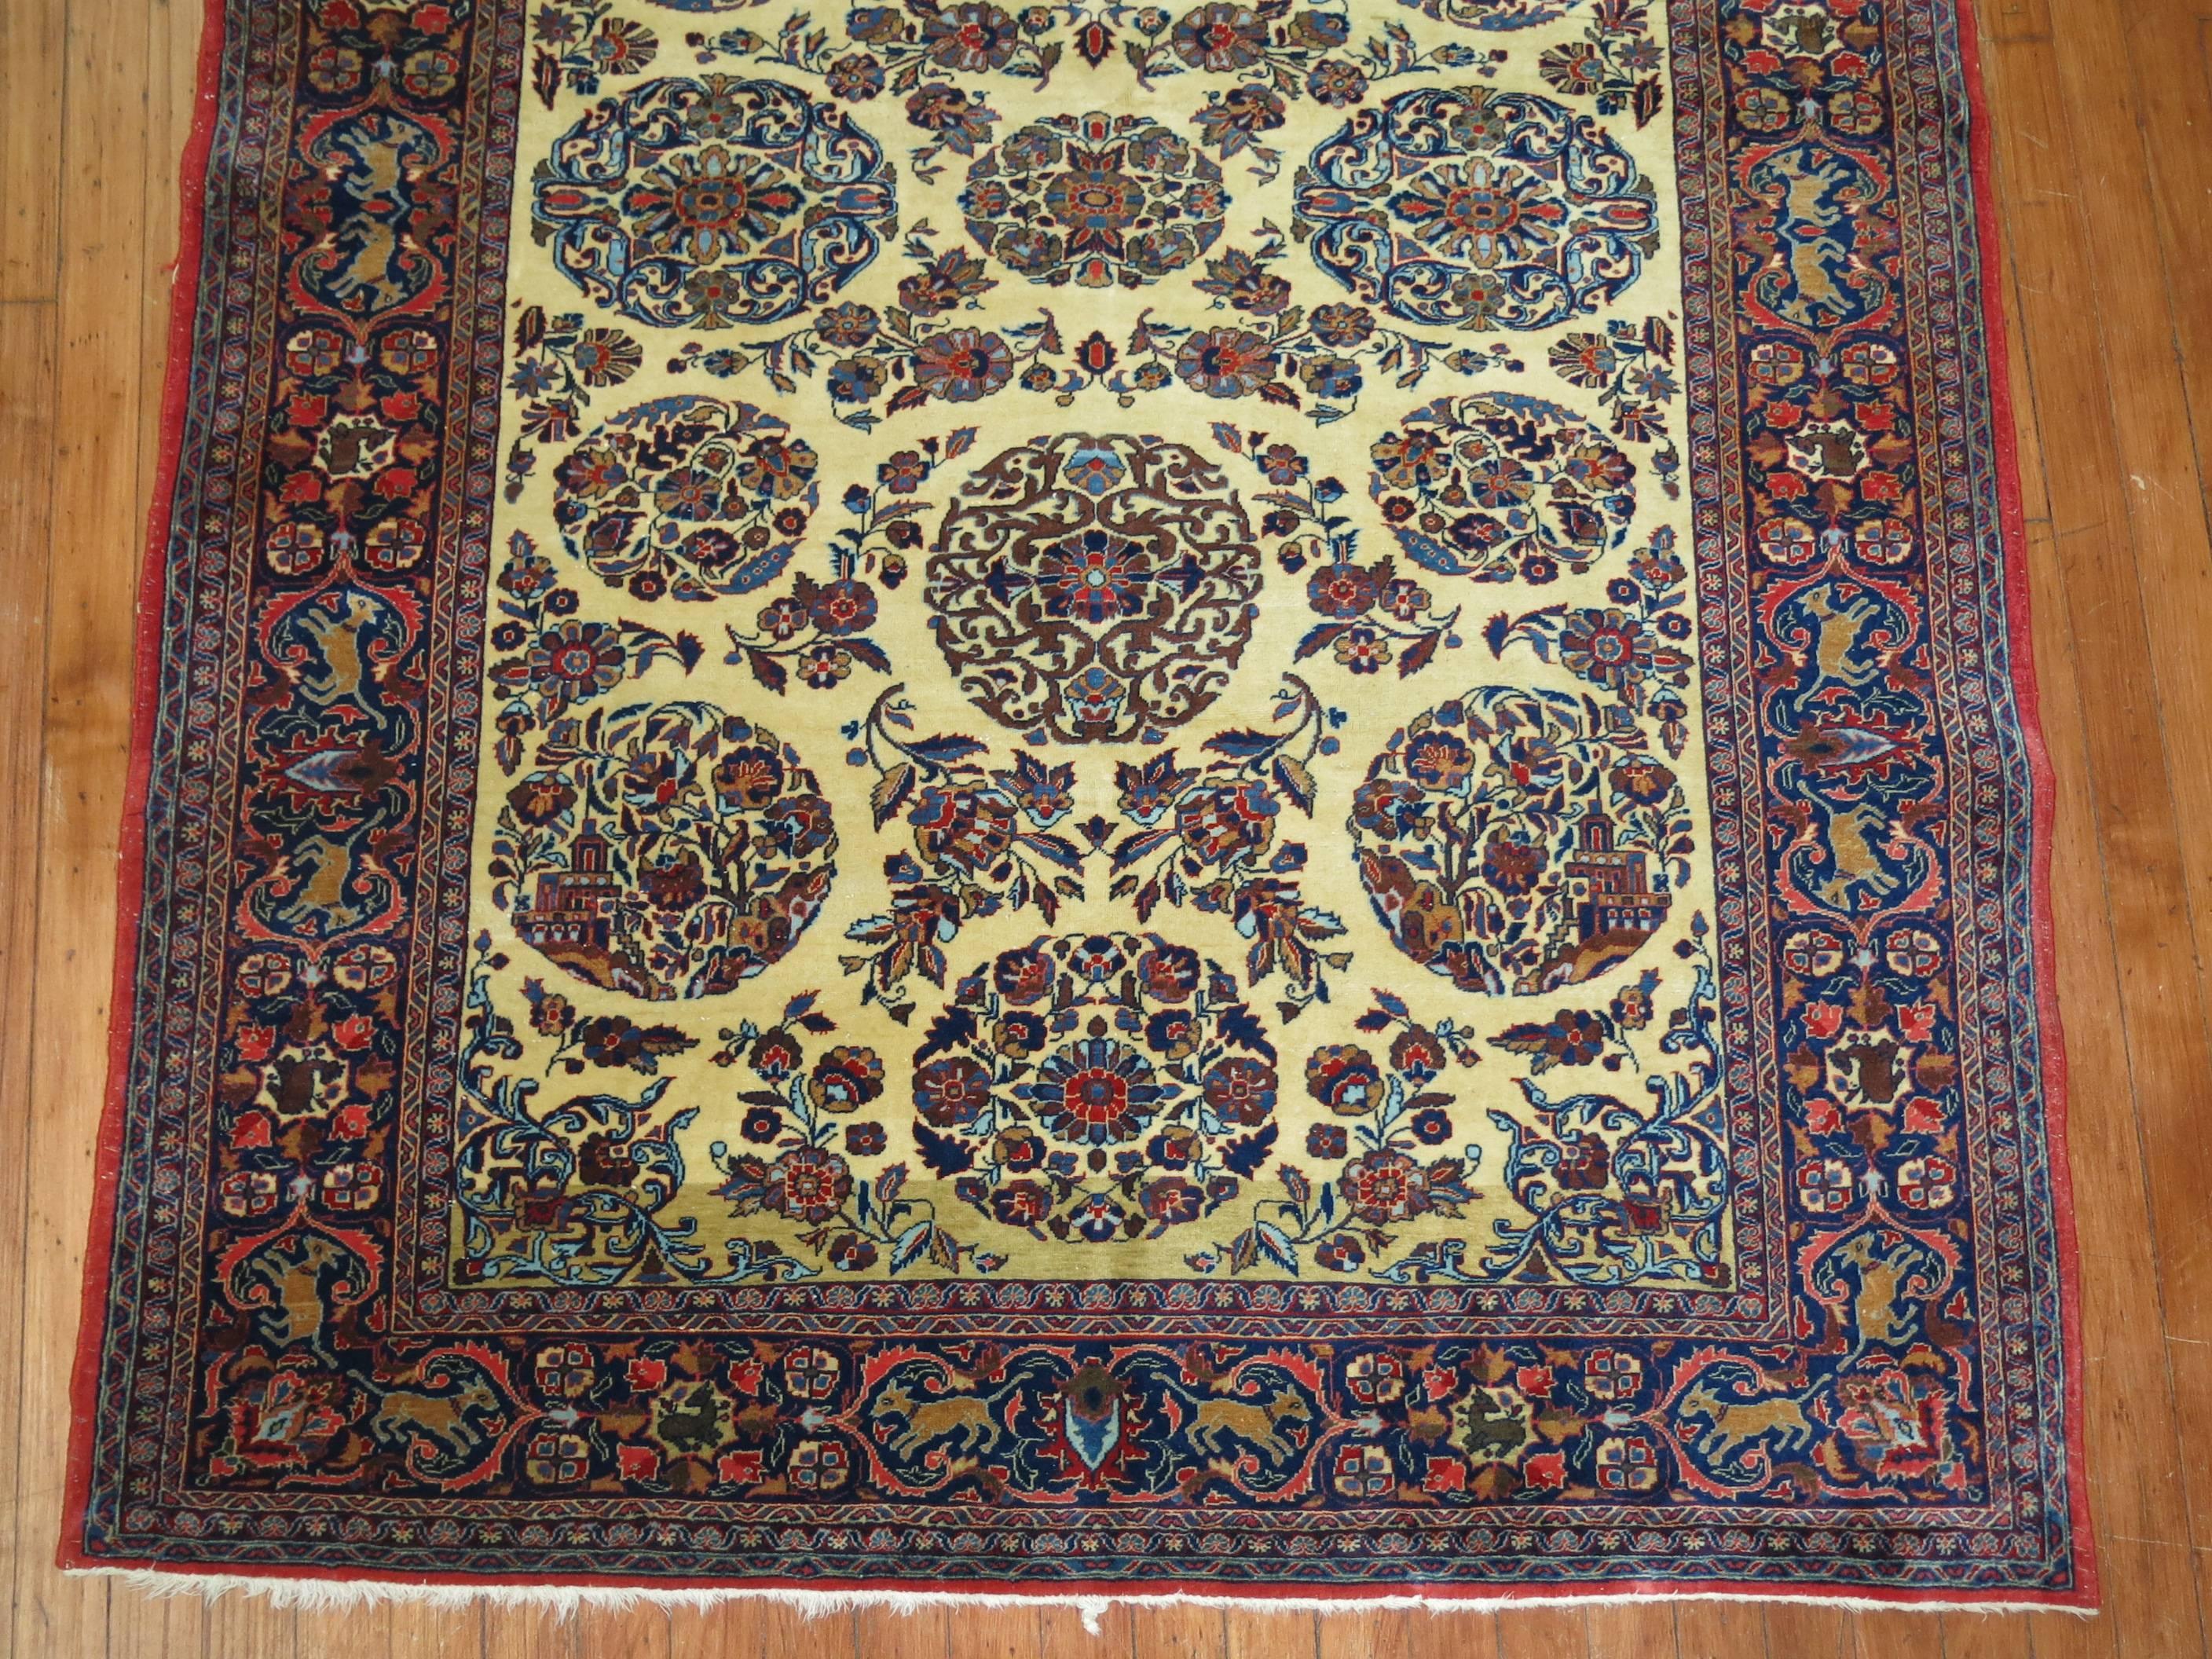 An enchanting early 20th century finely woven Persian Kashan rug with a bone colored field and navy blue pictorial animal border.

4'3'' x 6'6''